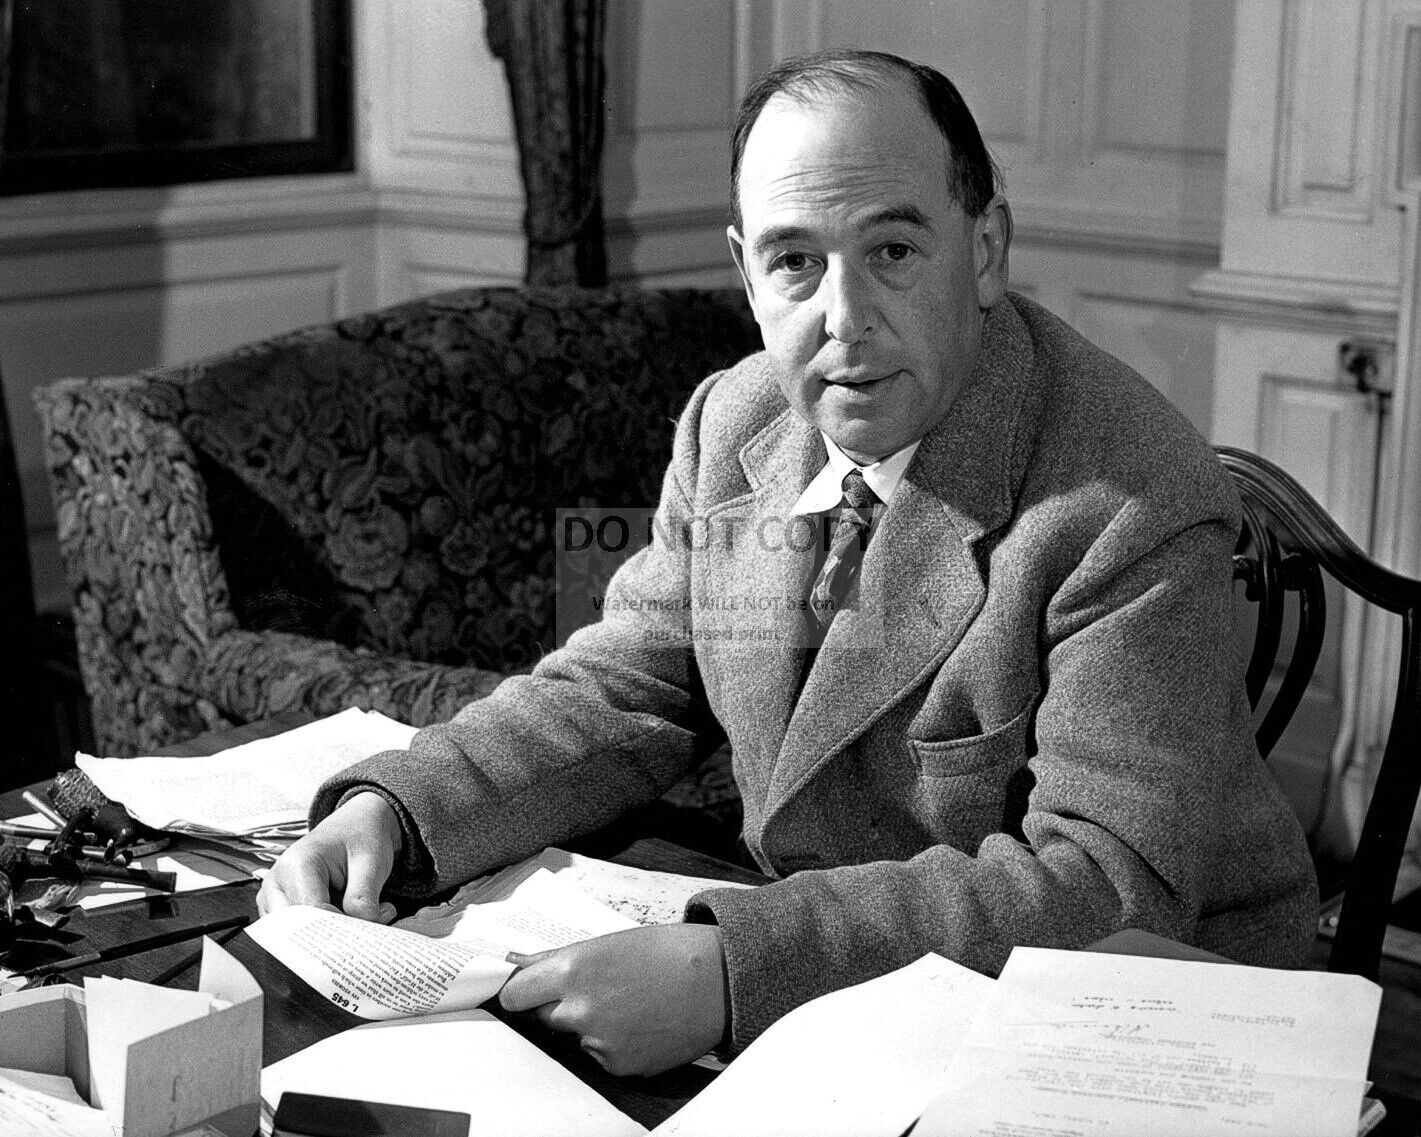 C.S. LEWIS BRITISH WRITER AND LAY THEOLOGIAN - 8X10 PUBLICITY PHOTO (MW401)